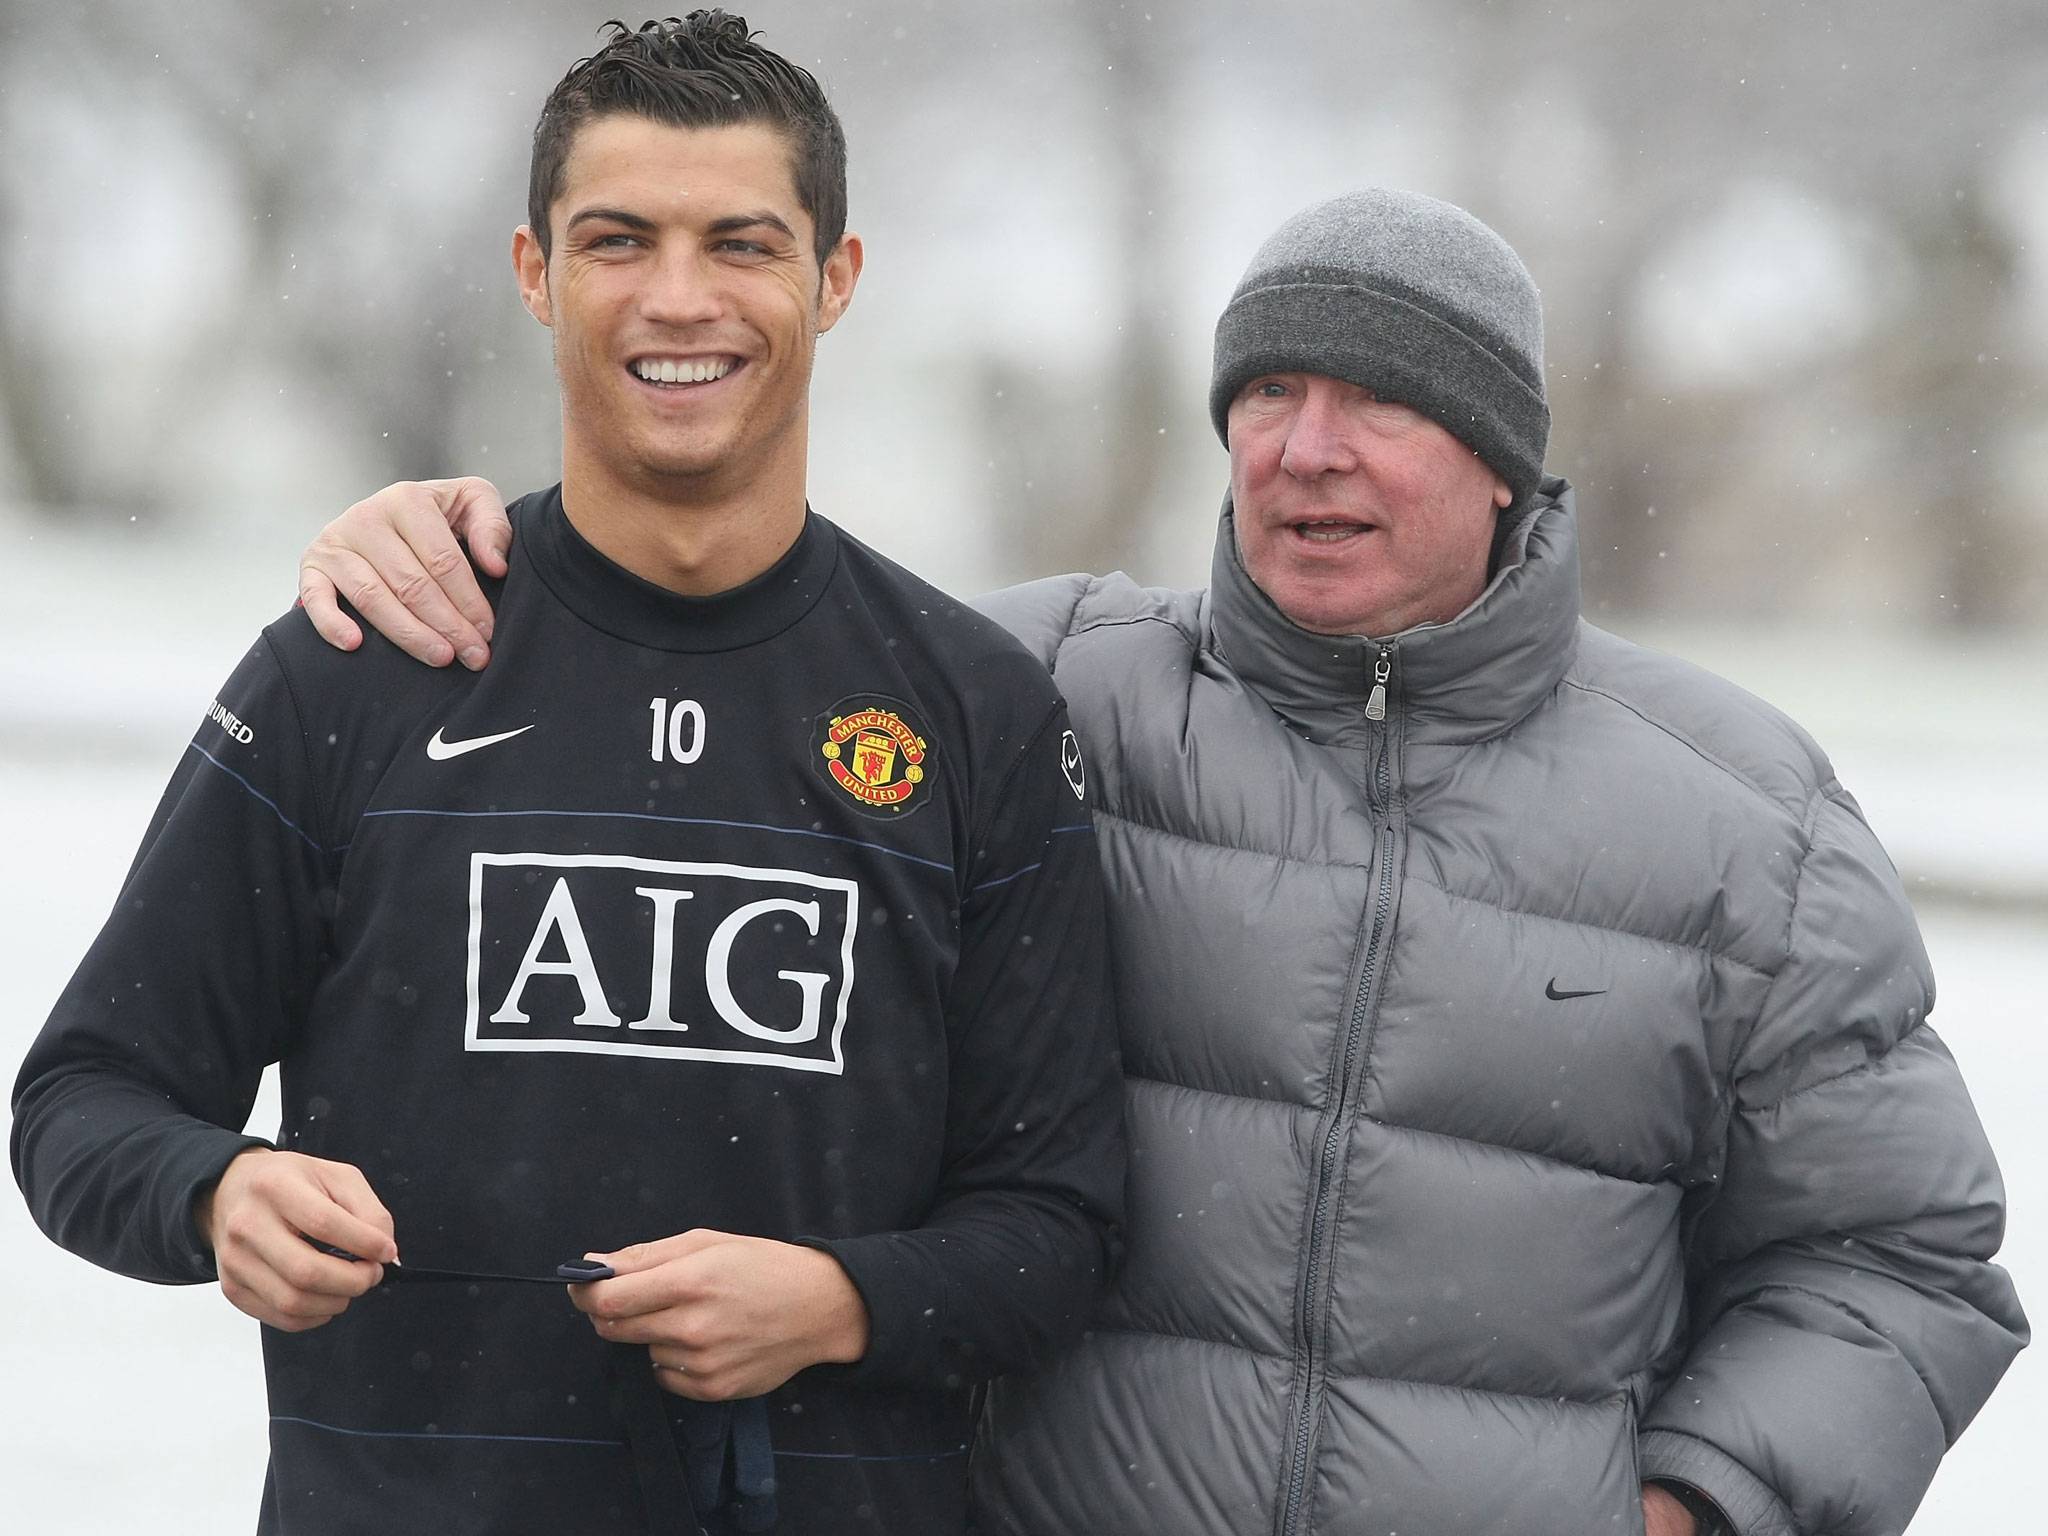 Sir Alex Ferguson and Cristiano Ronaldo during Manchester United training in 2009